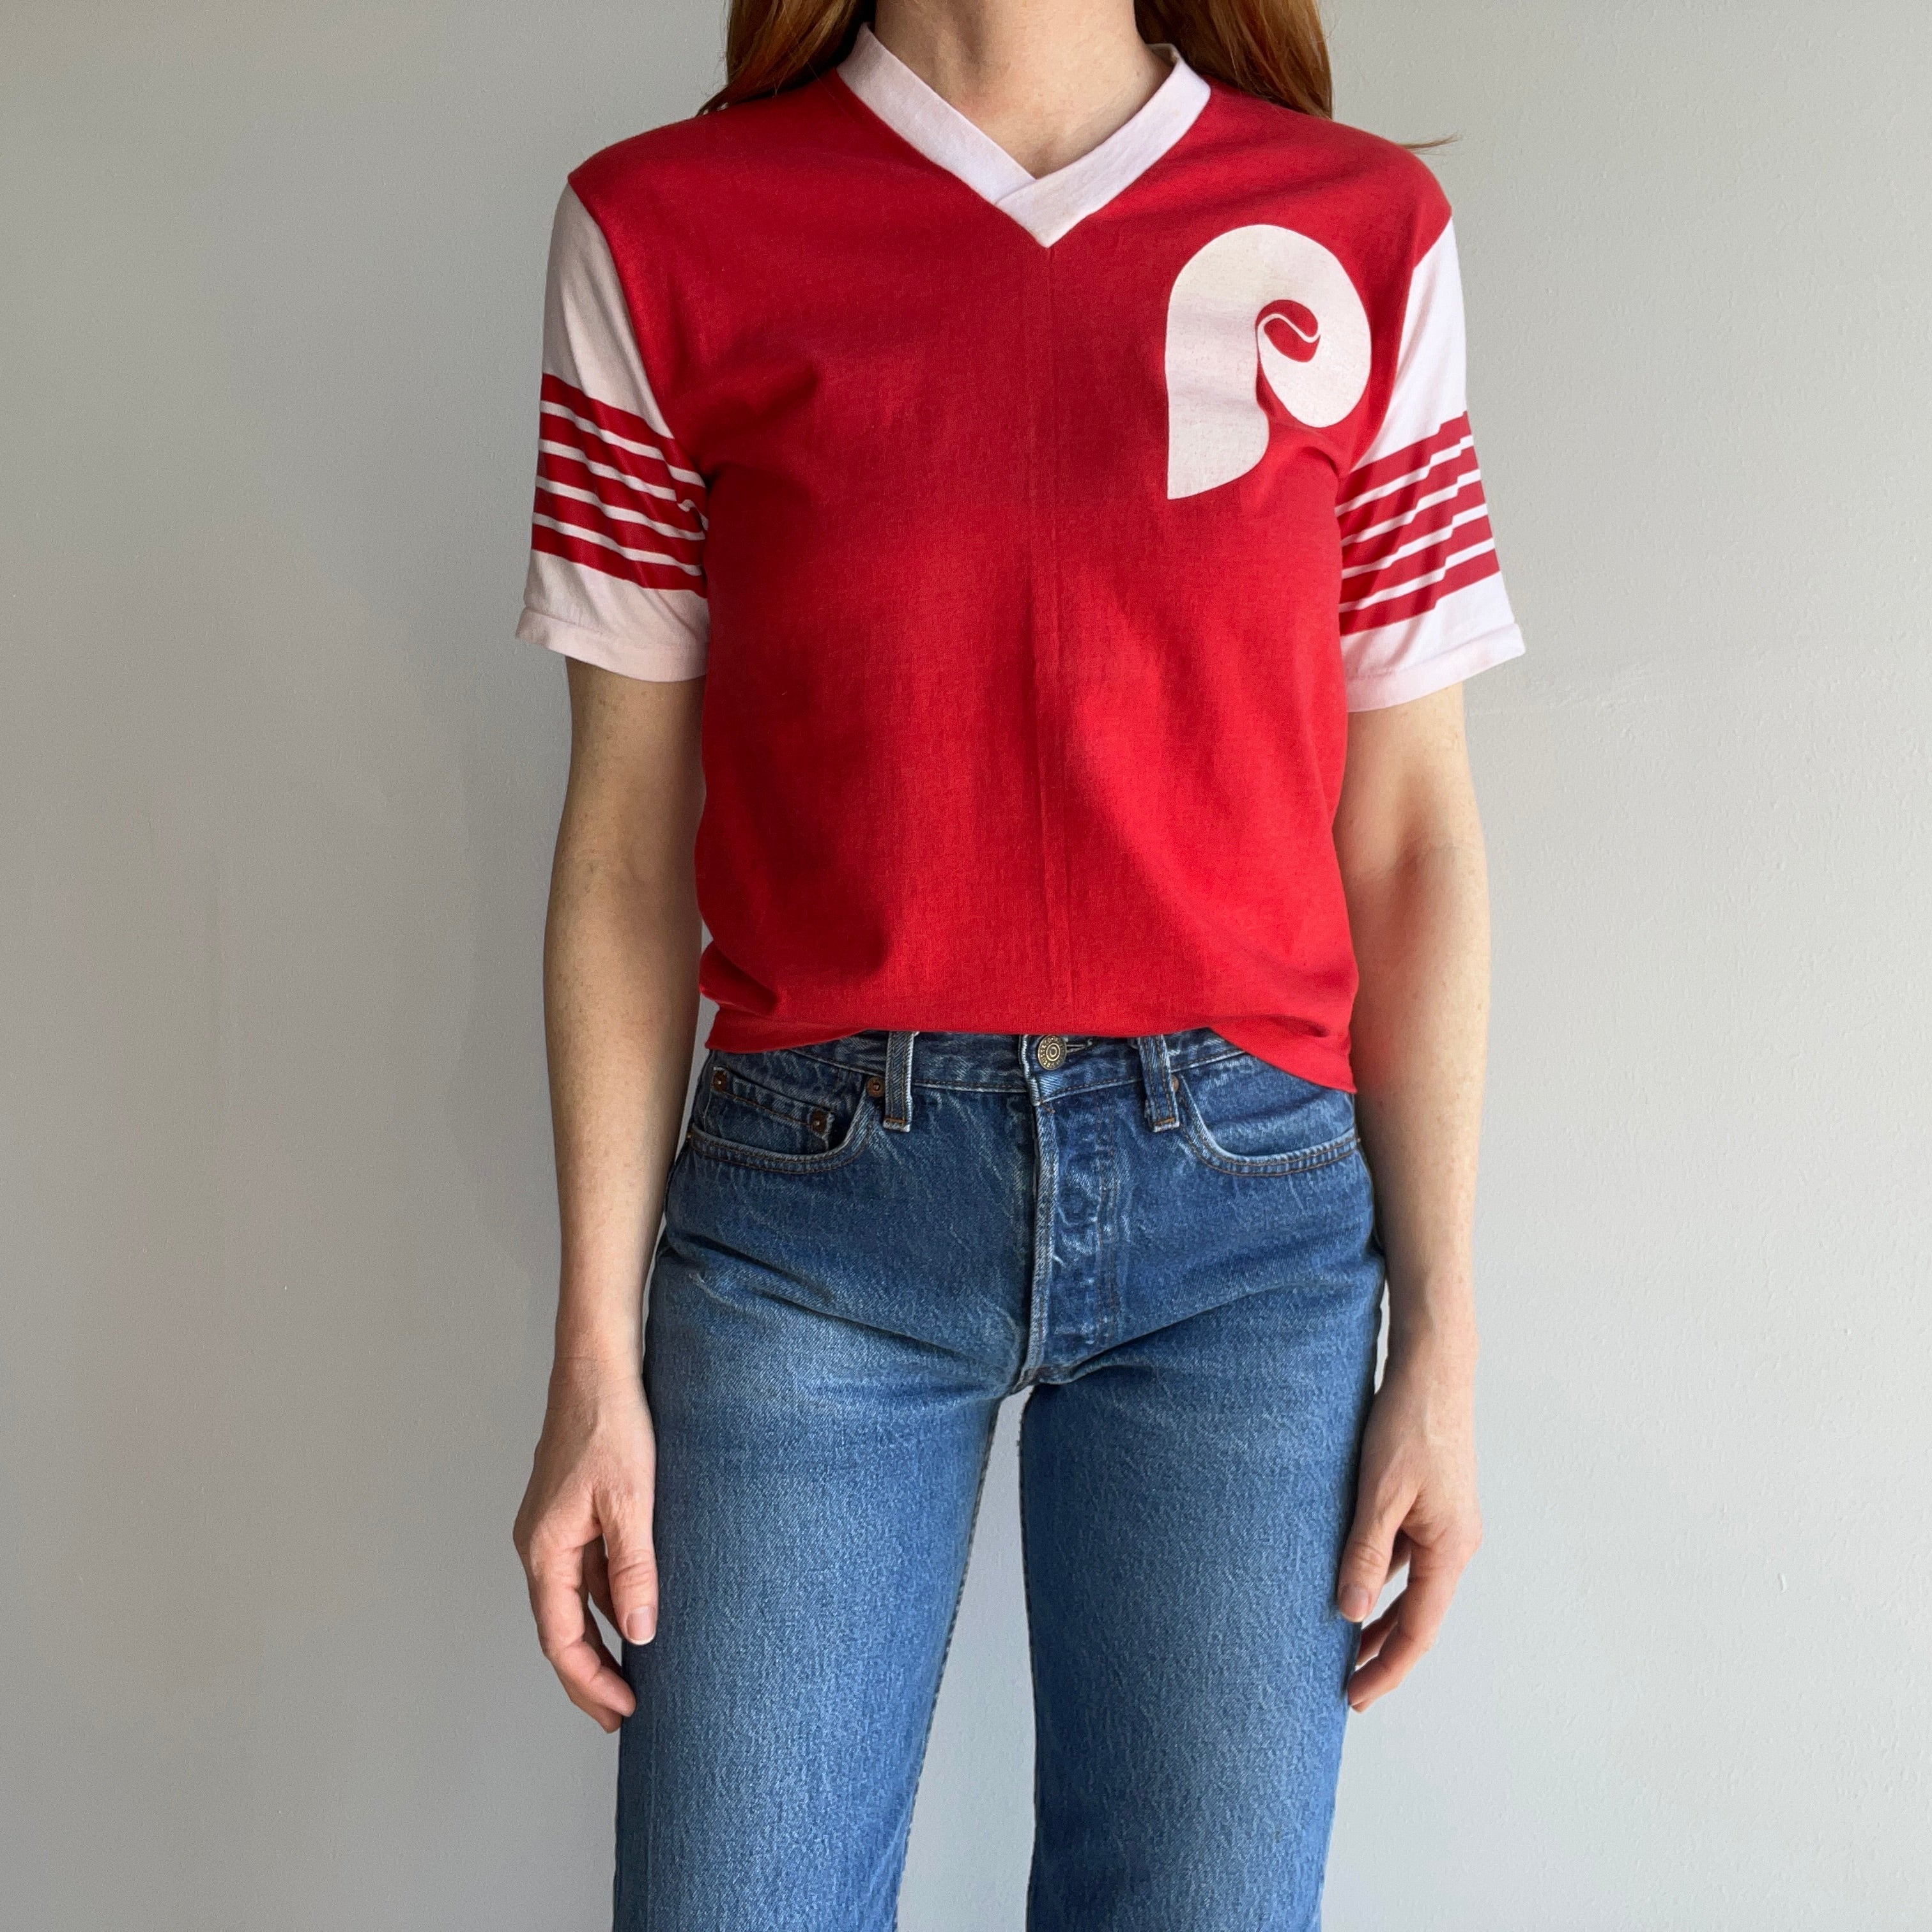 1980s Phillies T-Shirt by Velva Sheen - Collectible